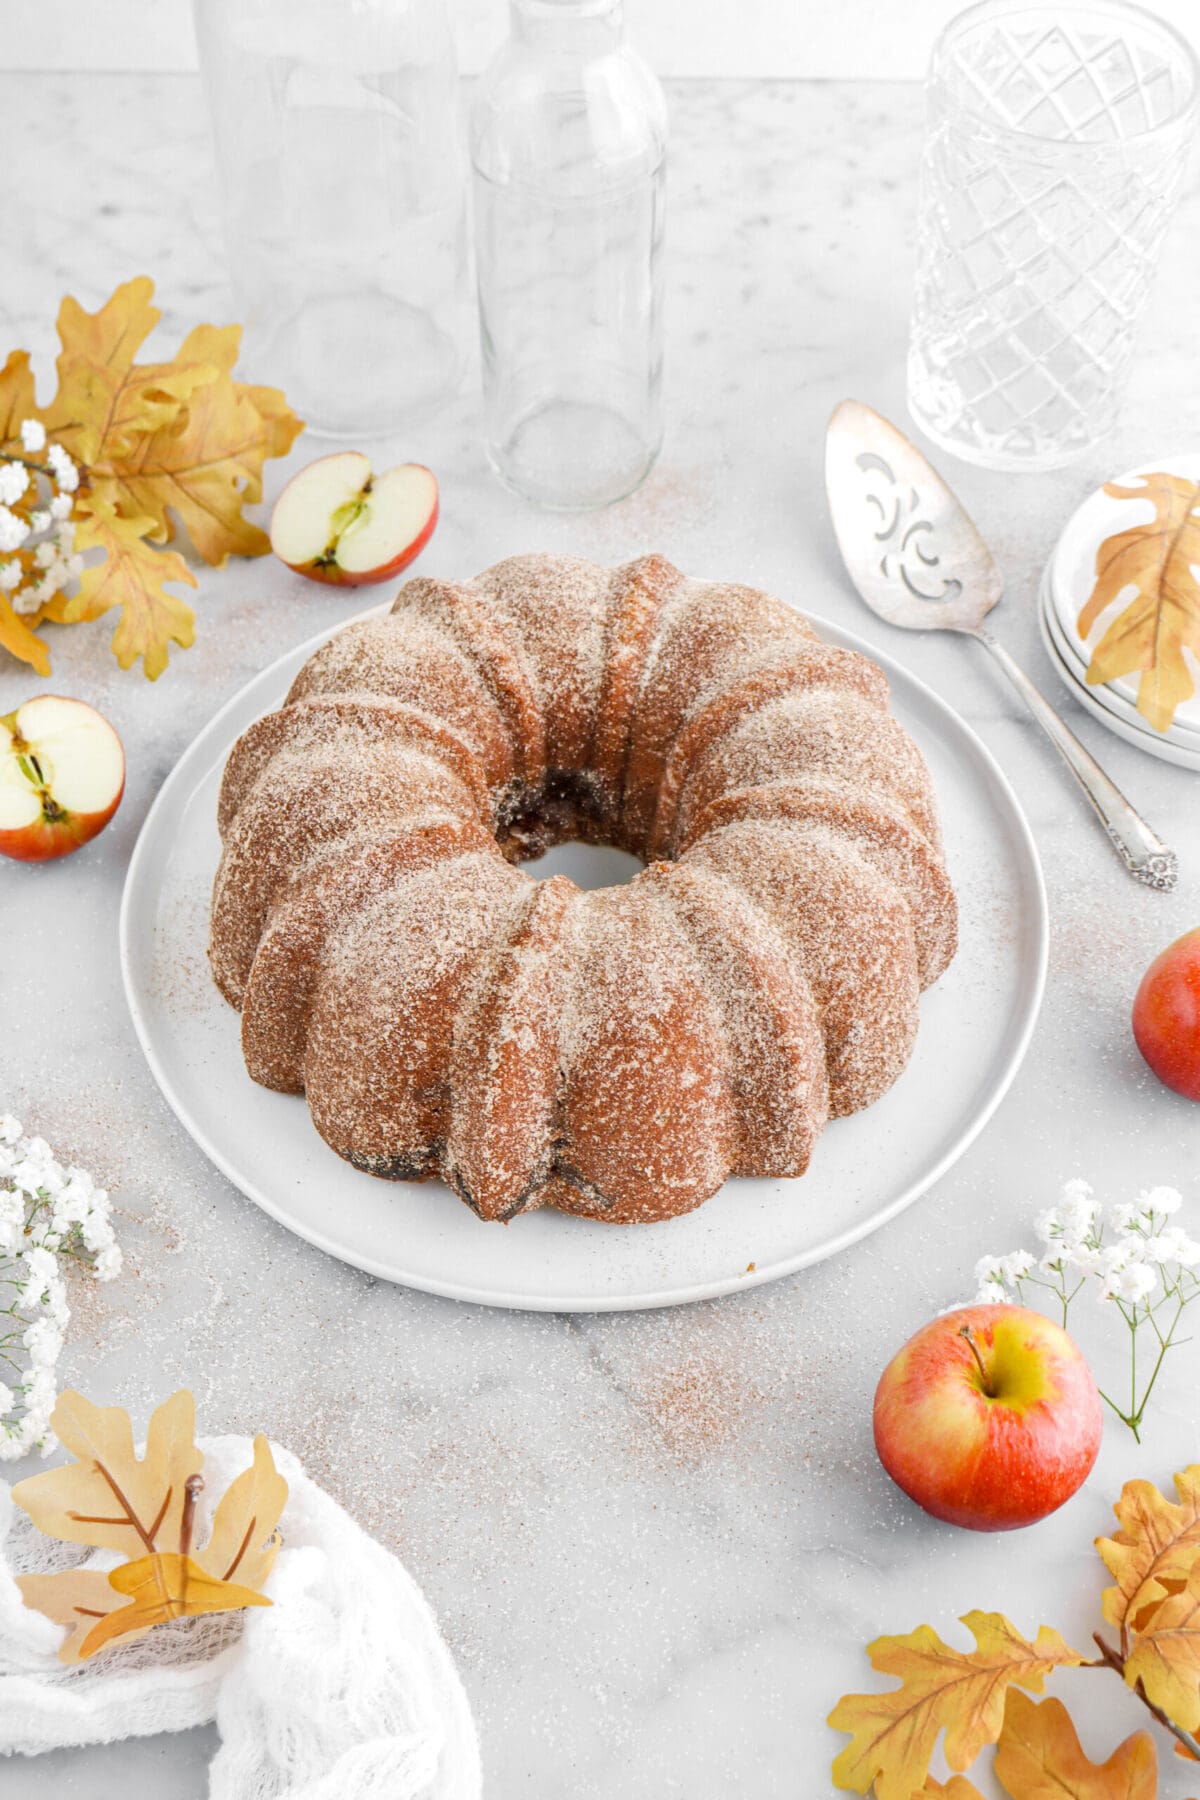 angled image of apple cider donut cake on white plate with yellow leaves and apples around on marble surface.